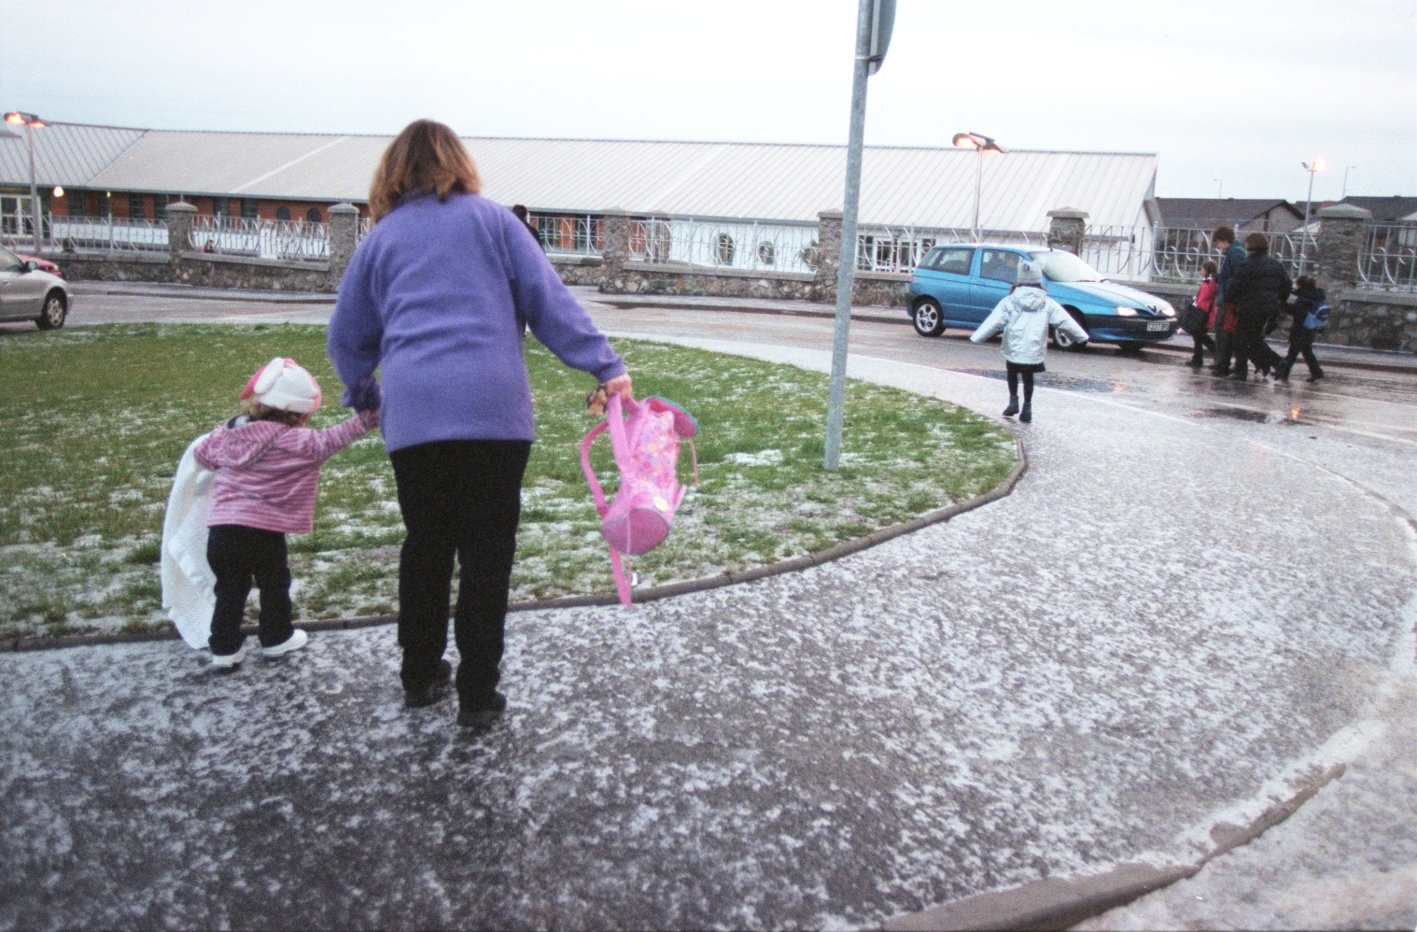 A mum is forced  to take her daughter on to the grassed area away from the  ice-covered pavement.